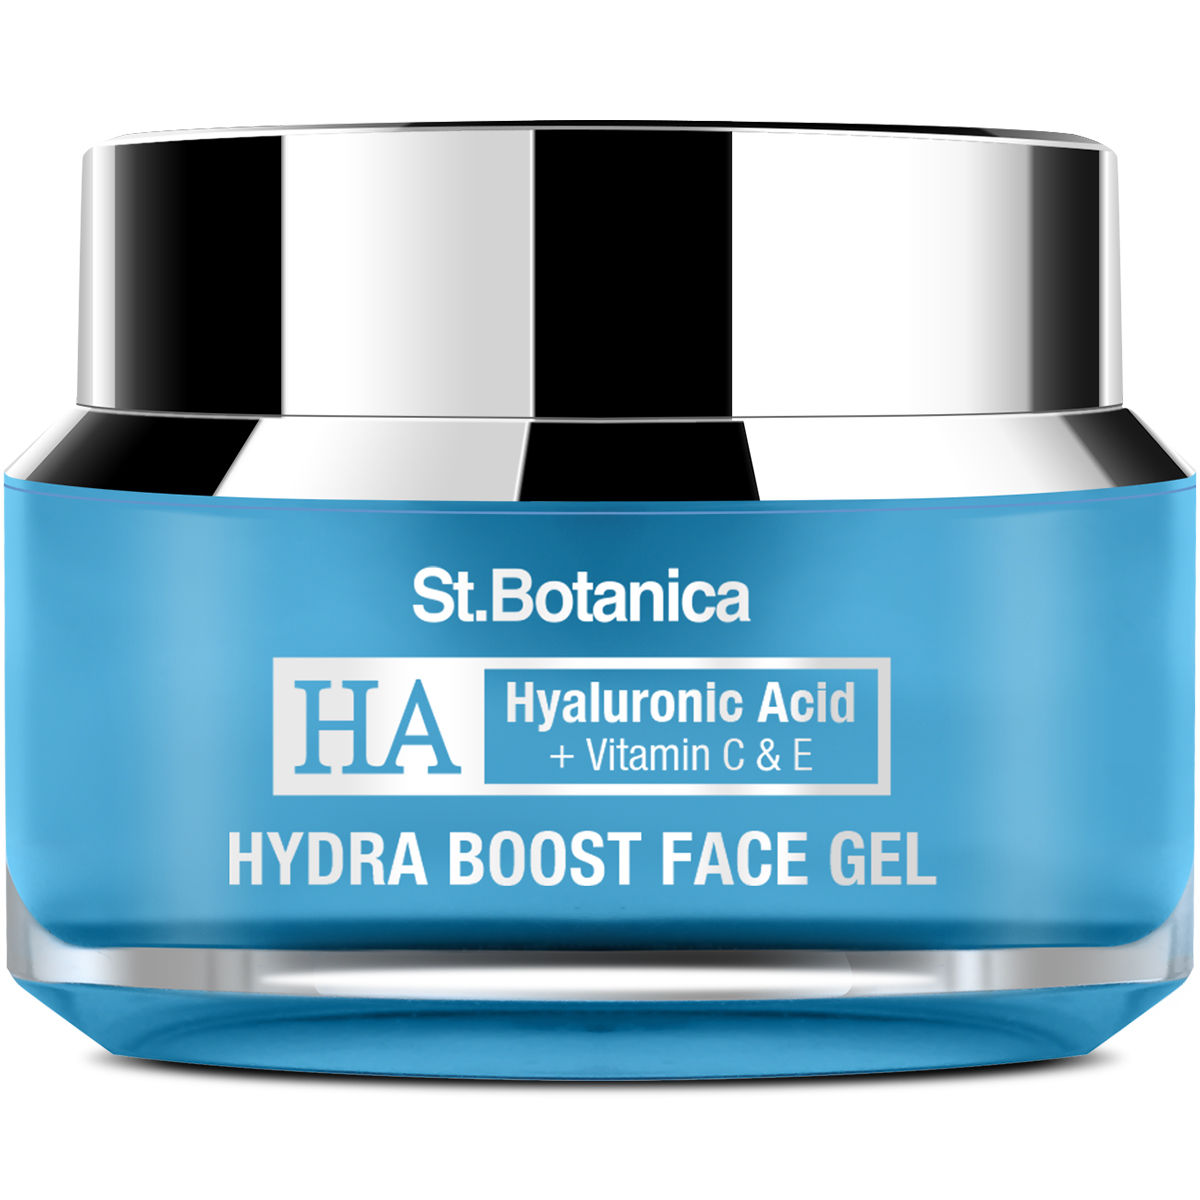 Buy StBotanica Hyaluronic Acid Hydra Boost Face Gel, 50g - Boosts Hydration For a Smooth & Supple Skin - Purplle